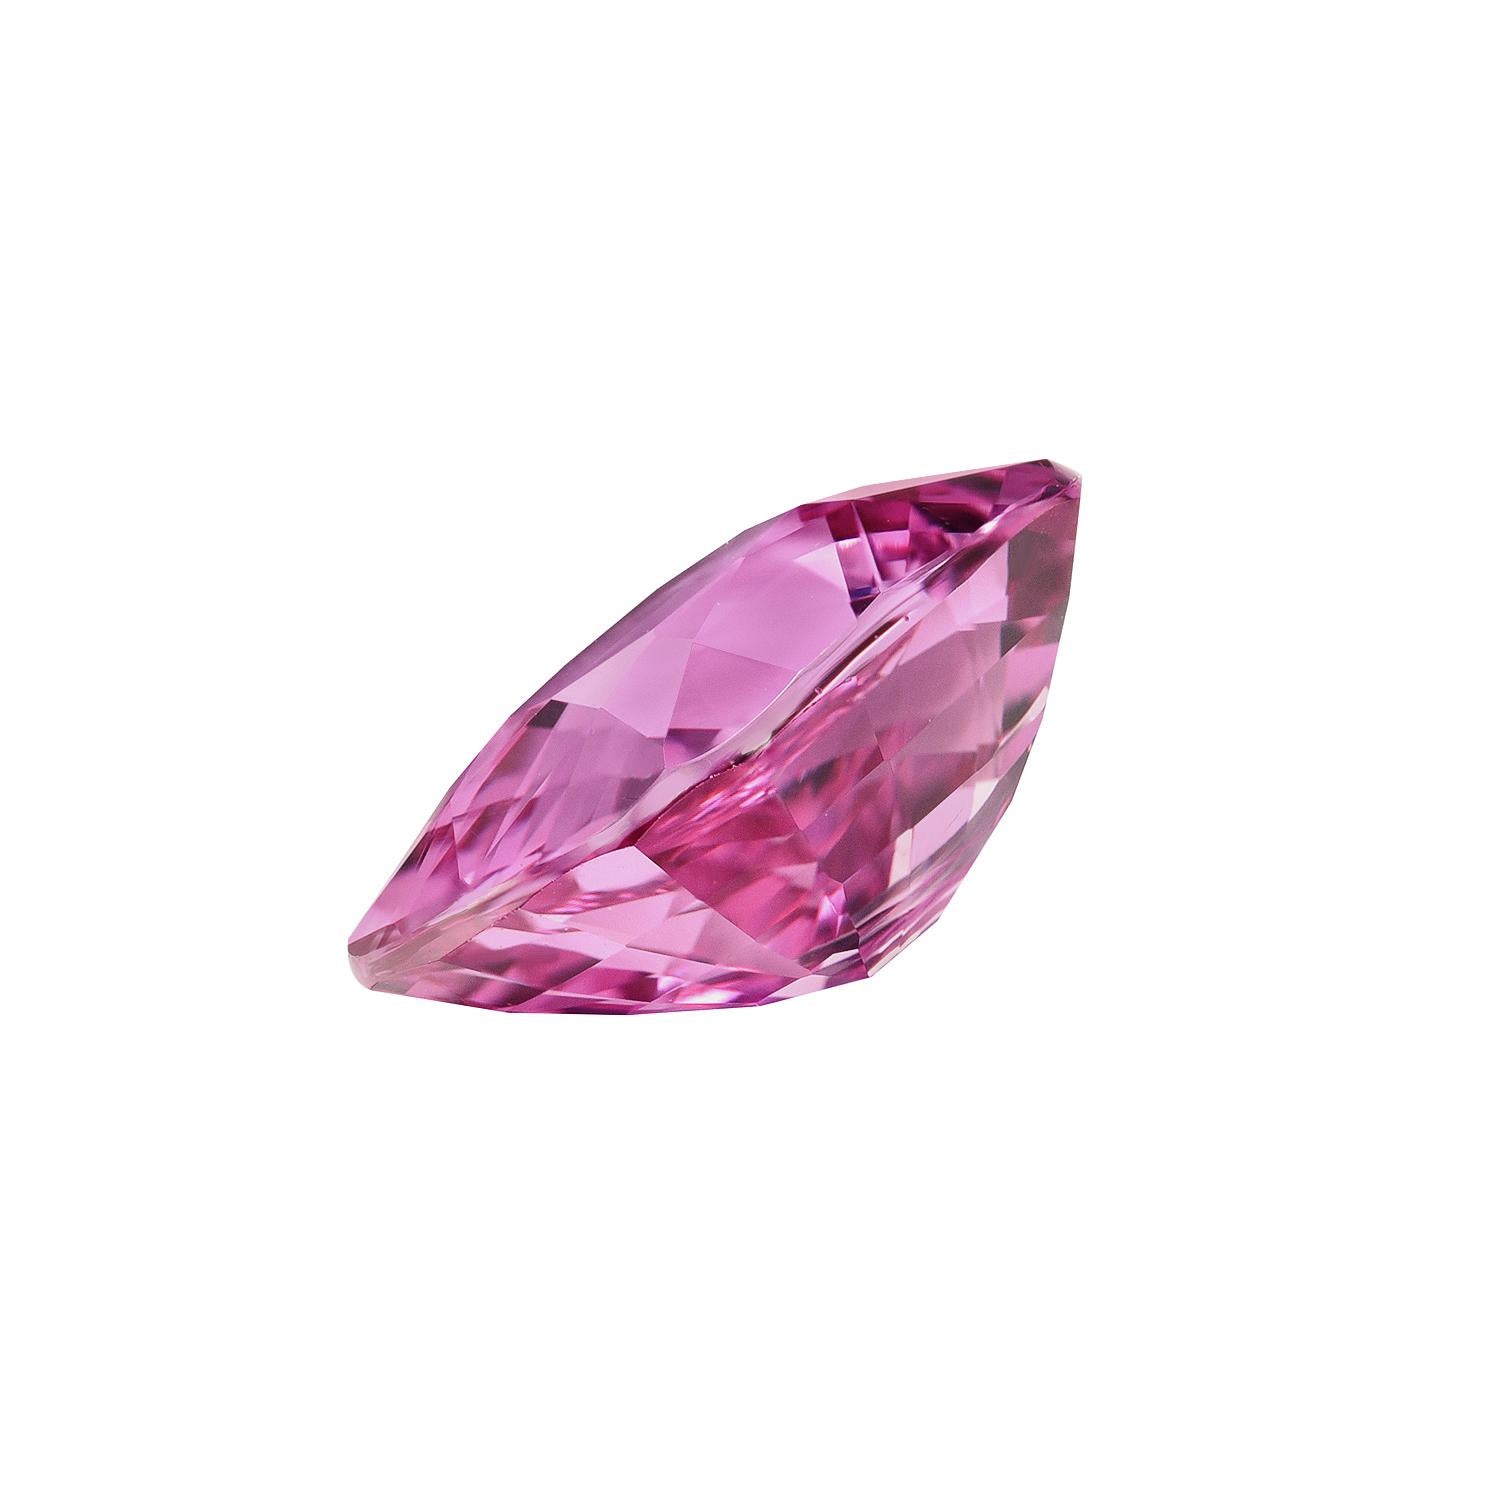 Fine and exclusive 3.06 carat unheated 